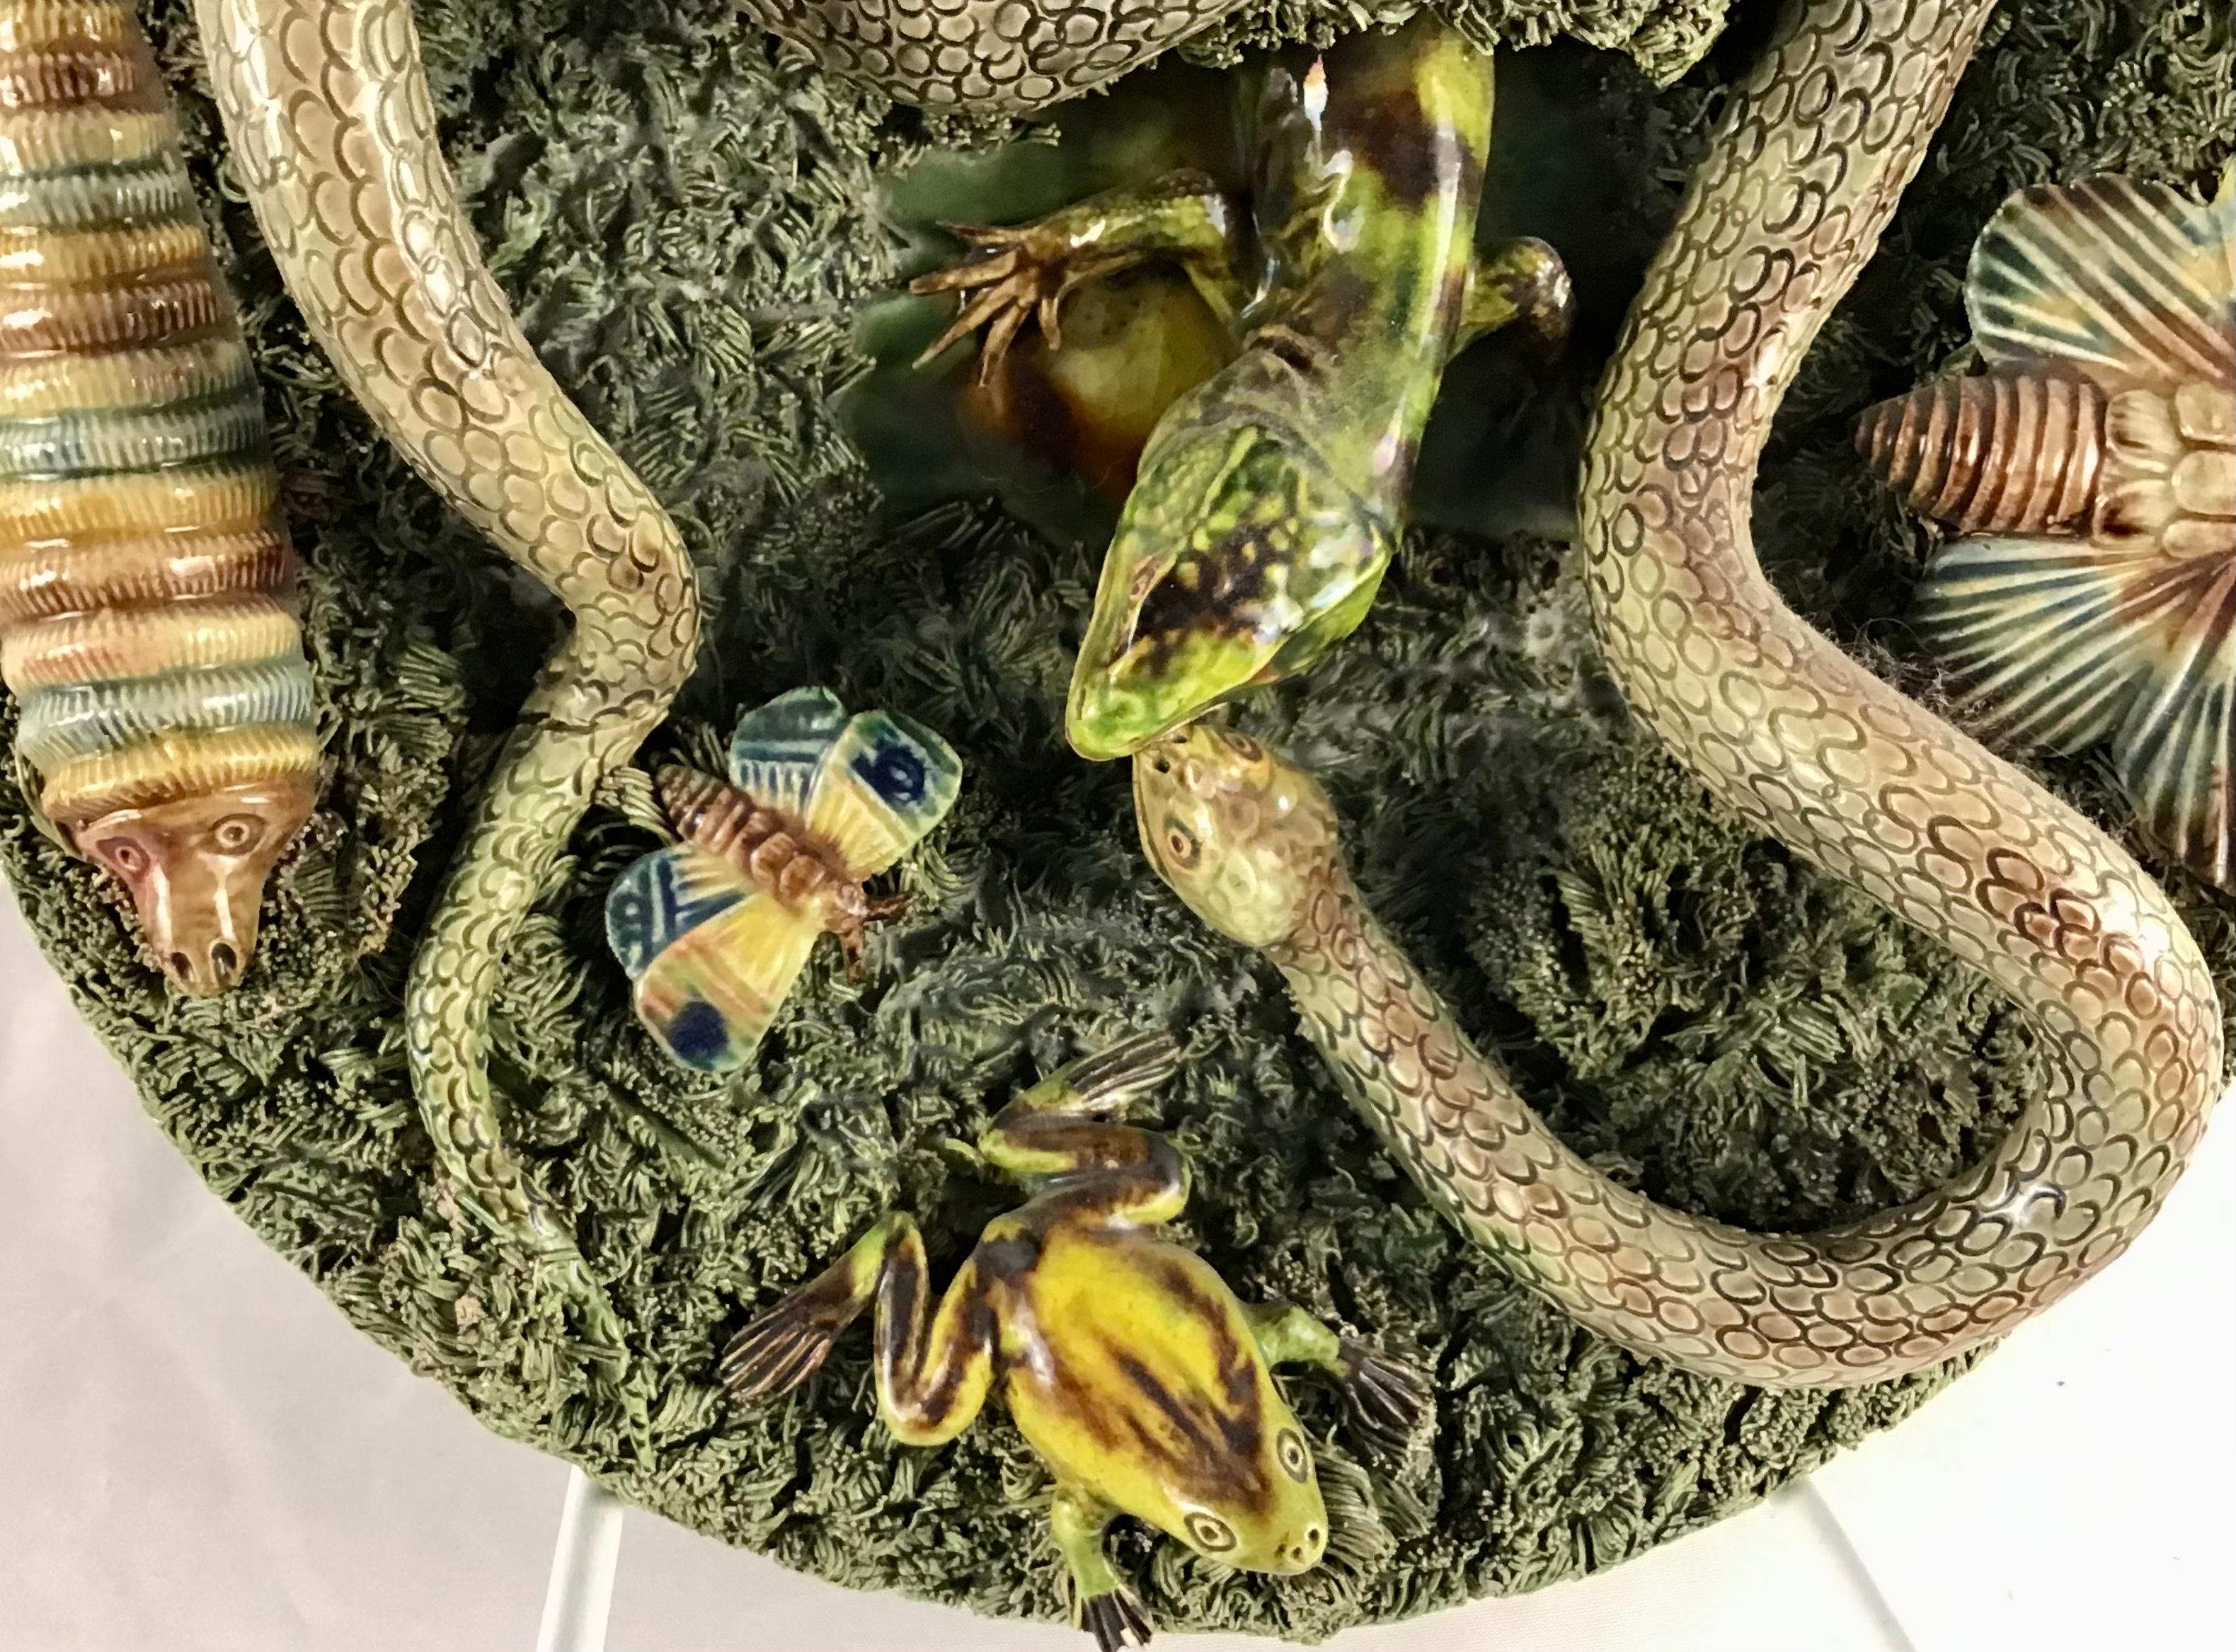 Antique 19th century Portuguese Majolica Palissy style plate with large snake and large lizard searching through mossy tuft, signed Jose Alves Cunha (Caldas da Rainha) with snake, worm, caterpillar, butterfly, frog and lizard. Impressed mark on back.